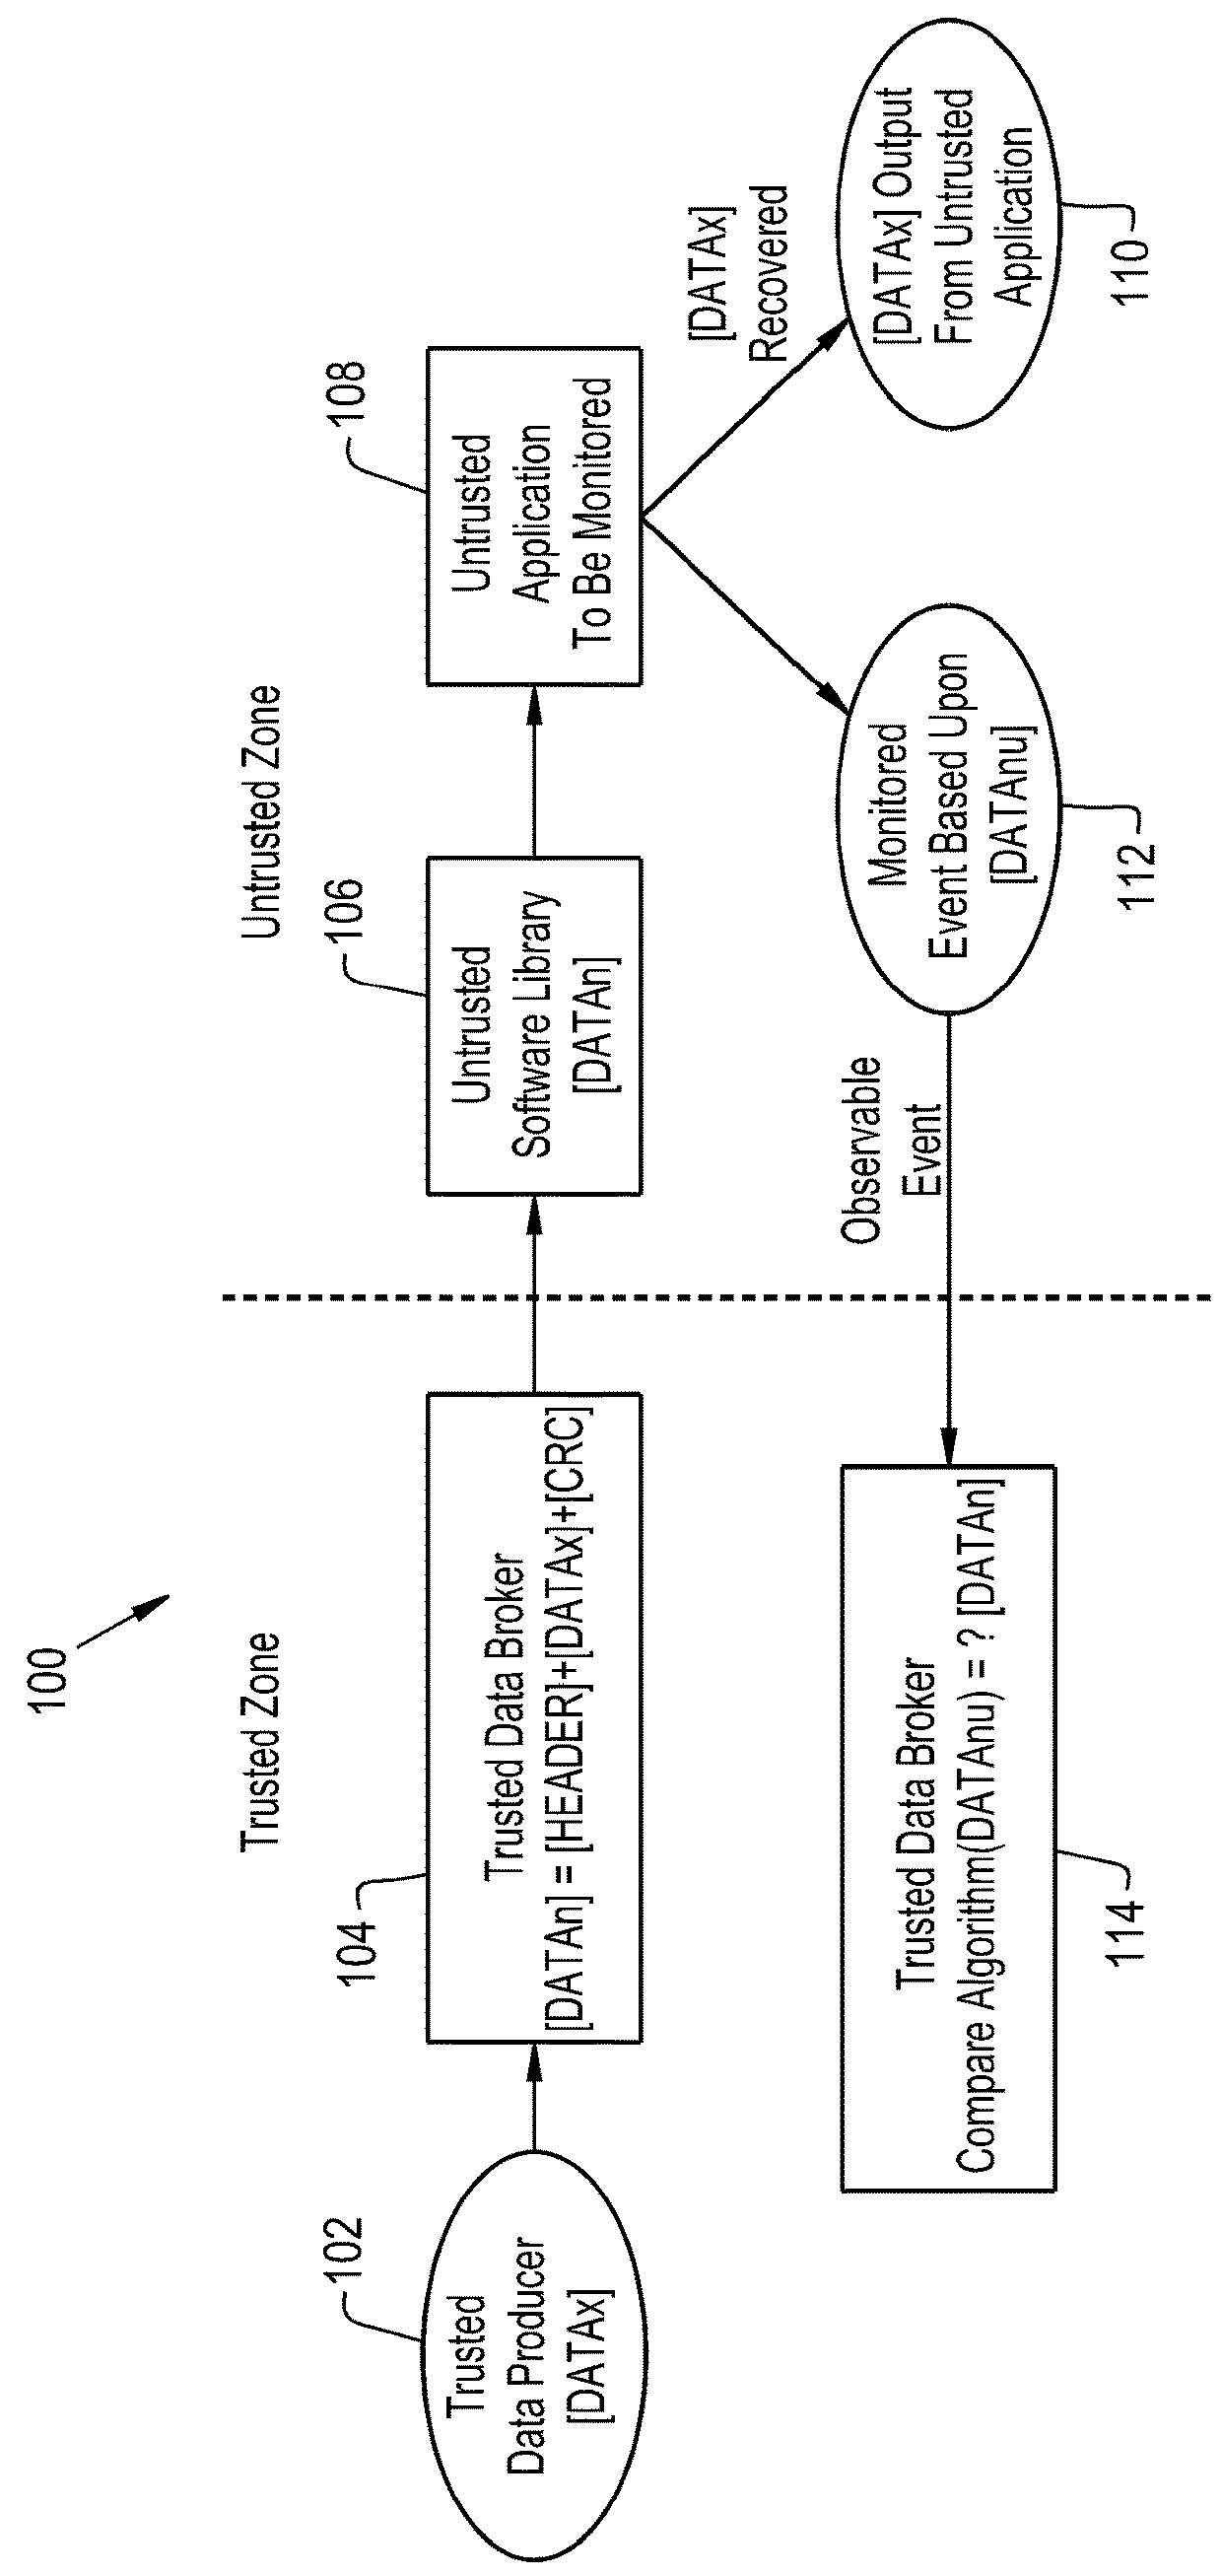 Vehicle display safety software compliance method and apparatus